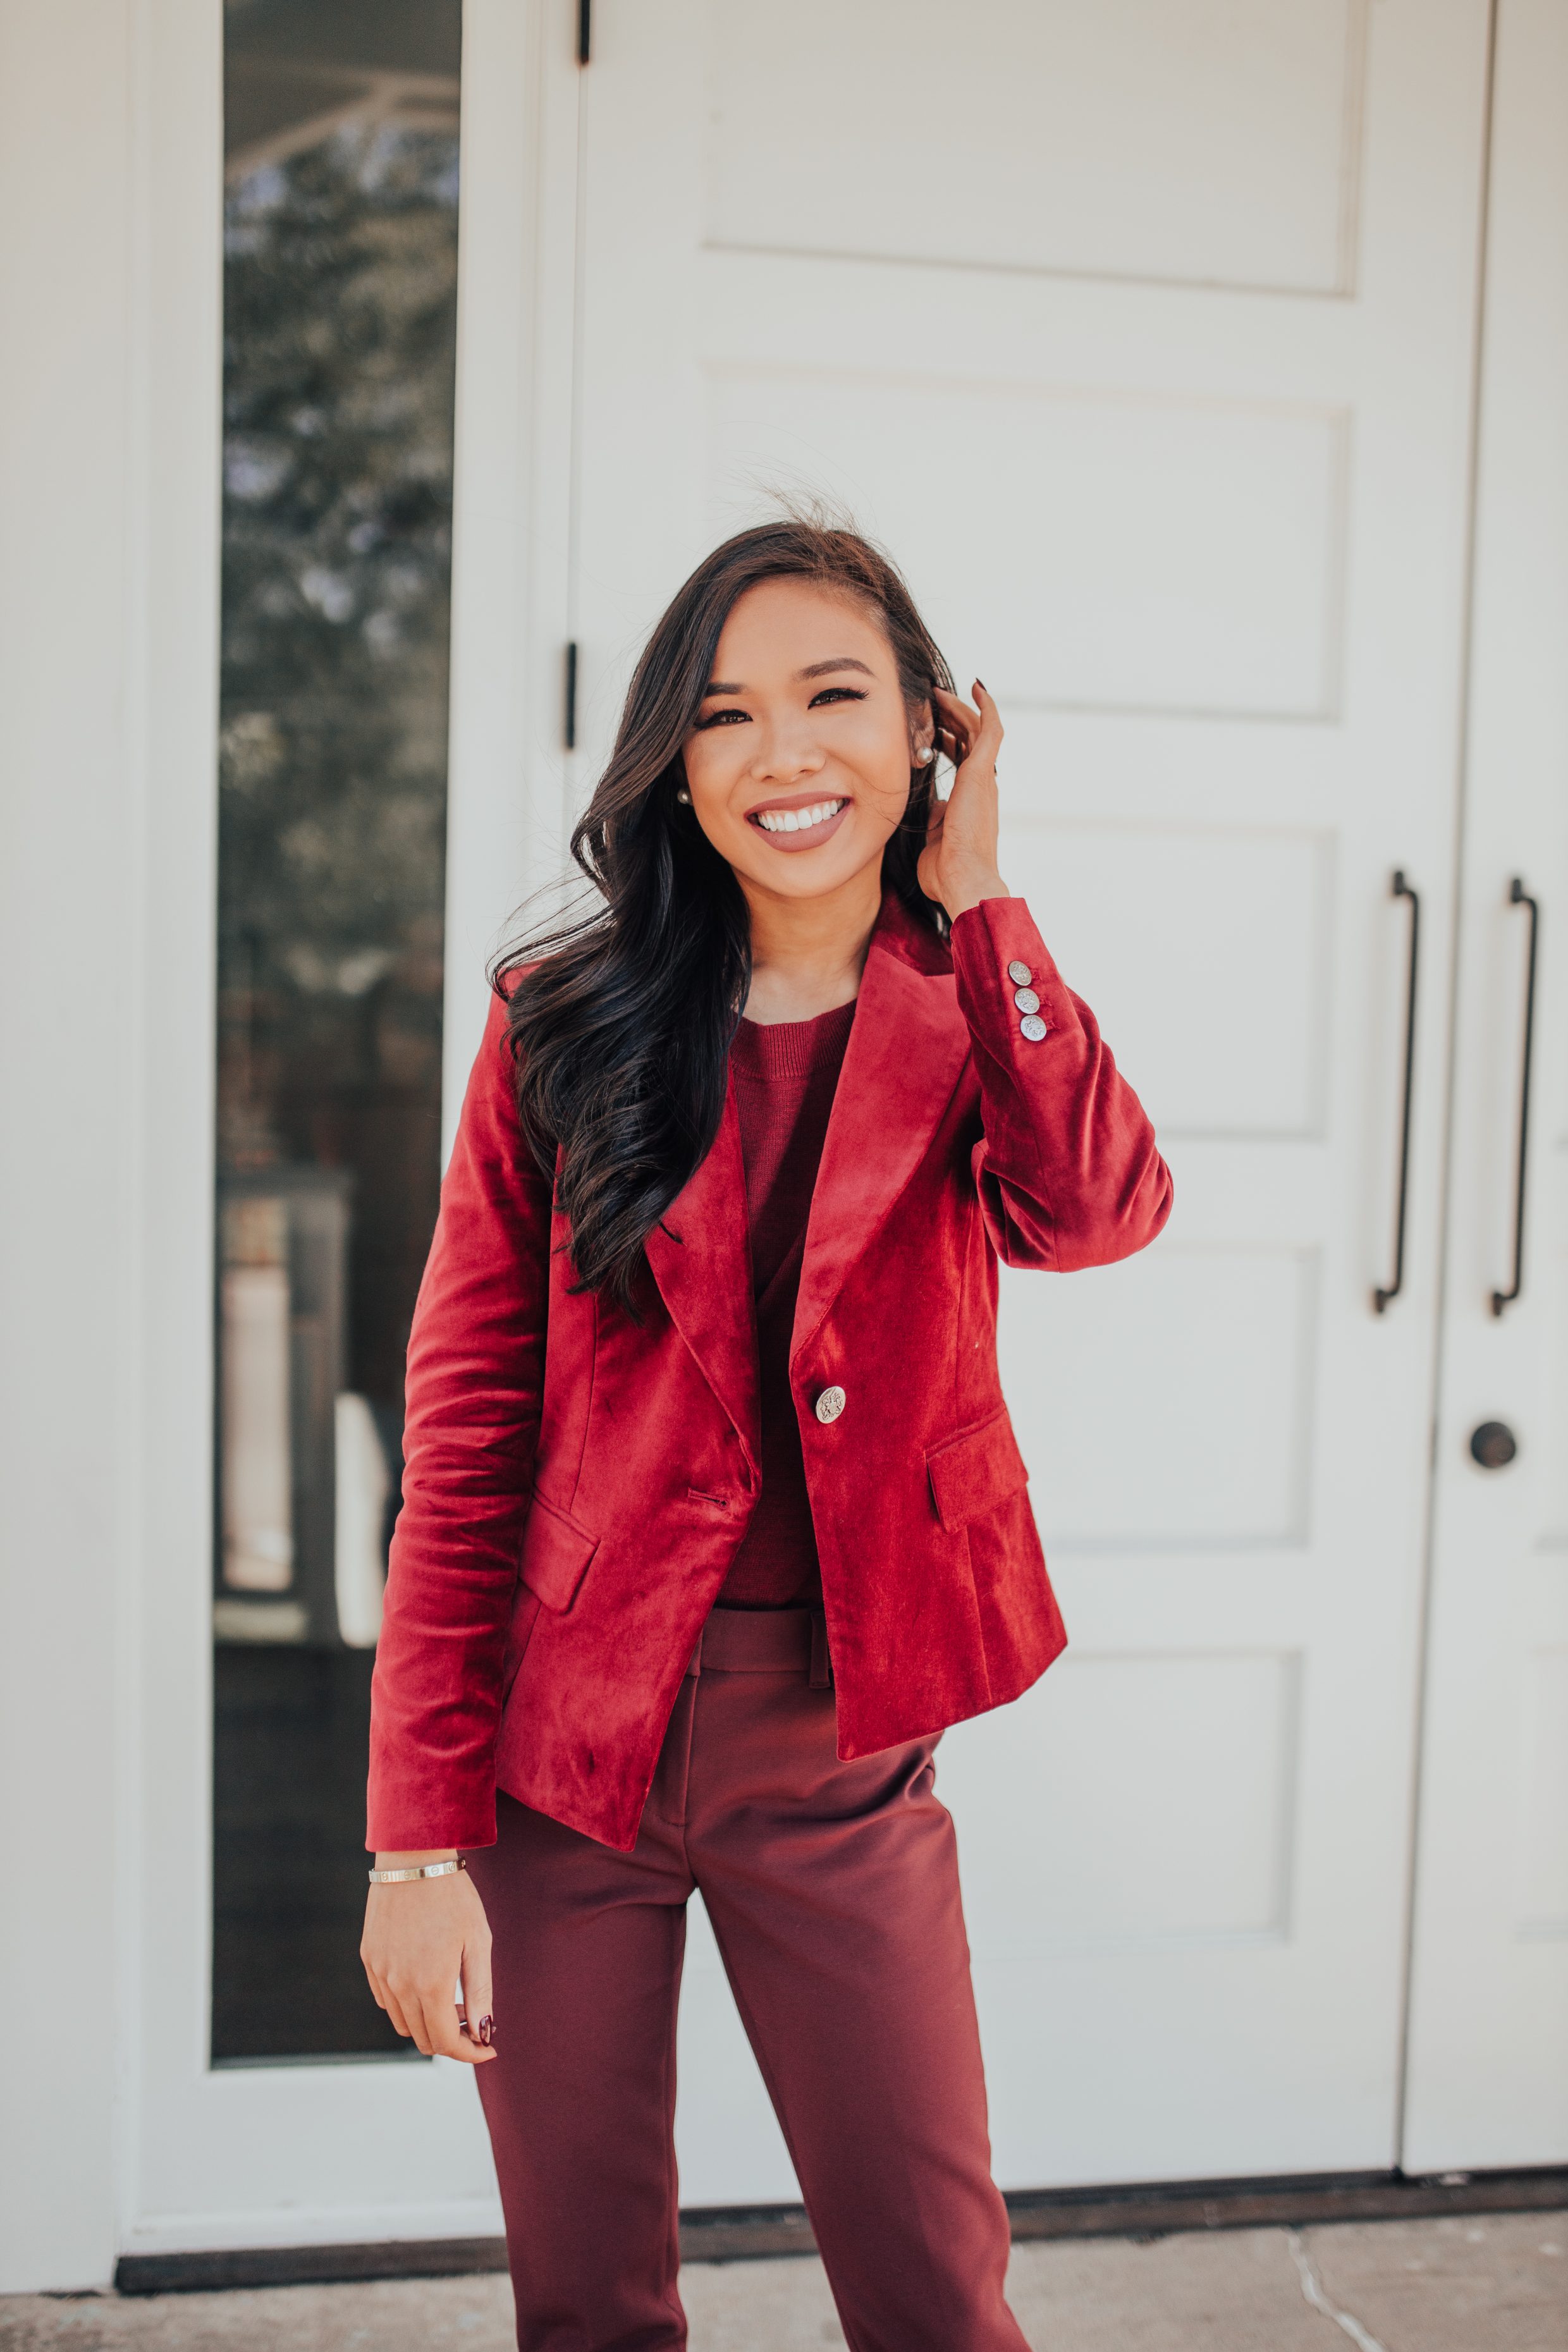 Red velvet blazer for a monochromatic work outfit